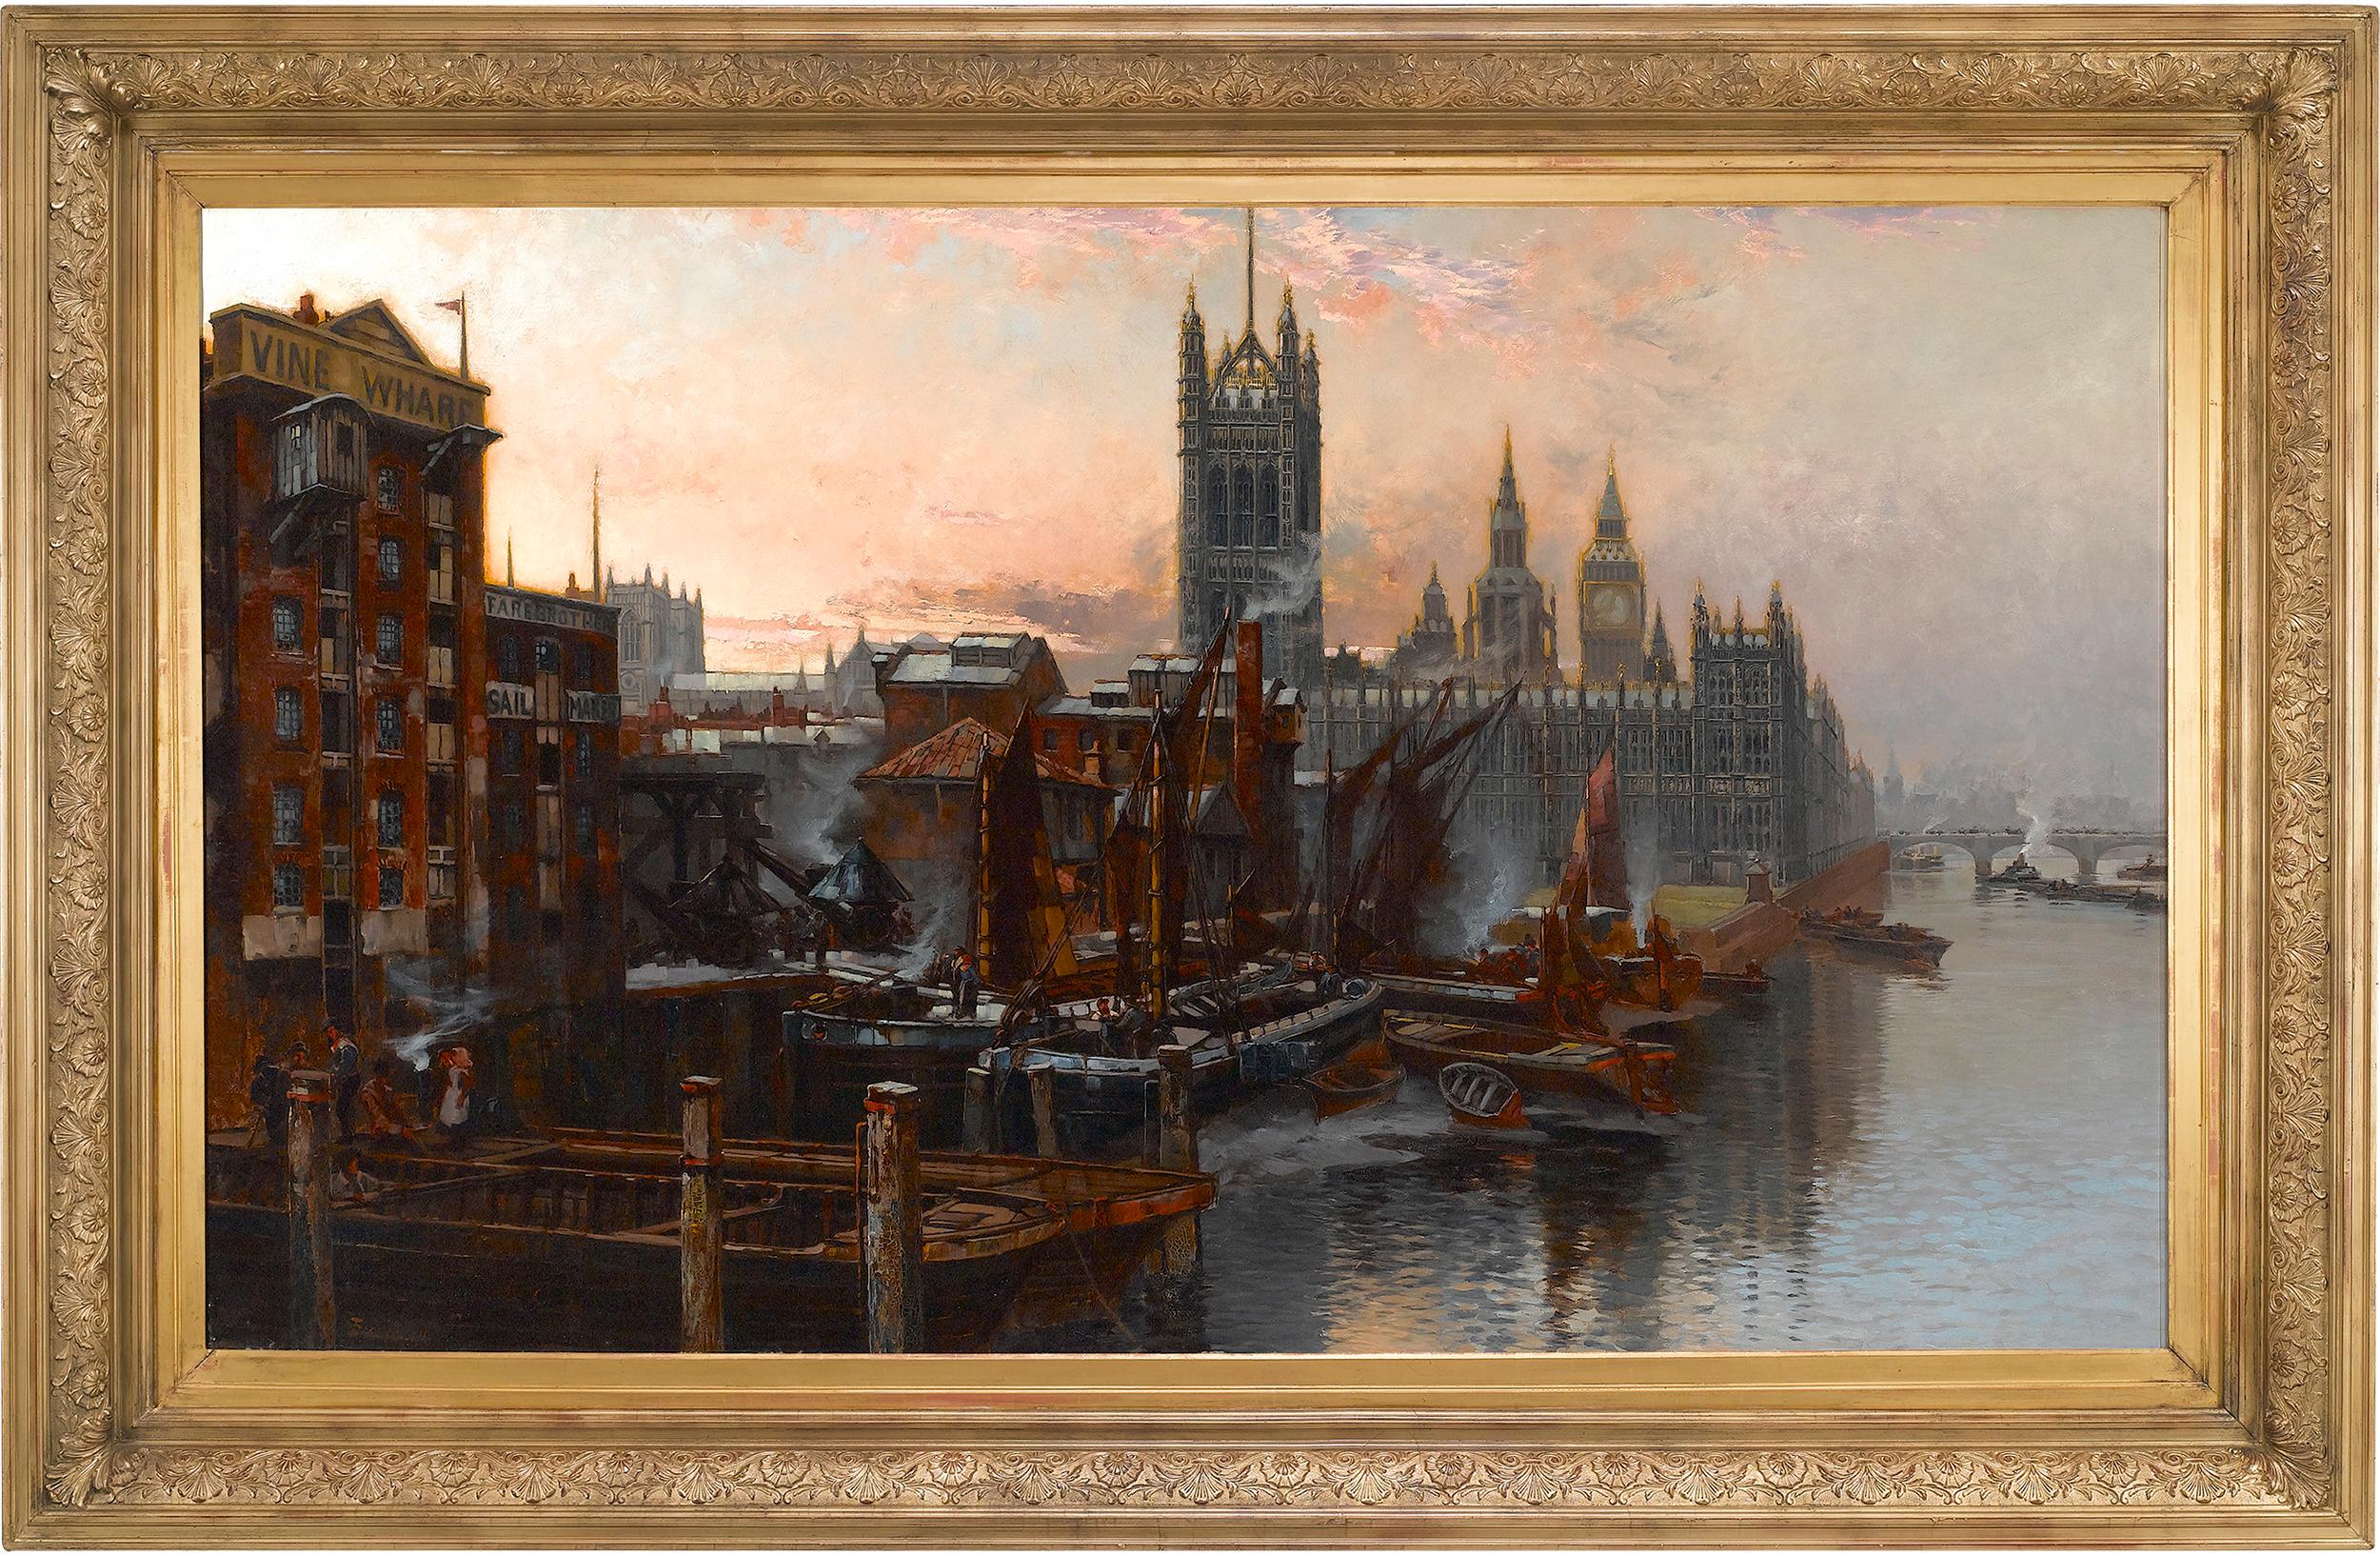 A View of the Houses of Parliament from the Thames, London - Painting by Thomas Greenhalgh